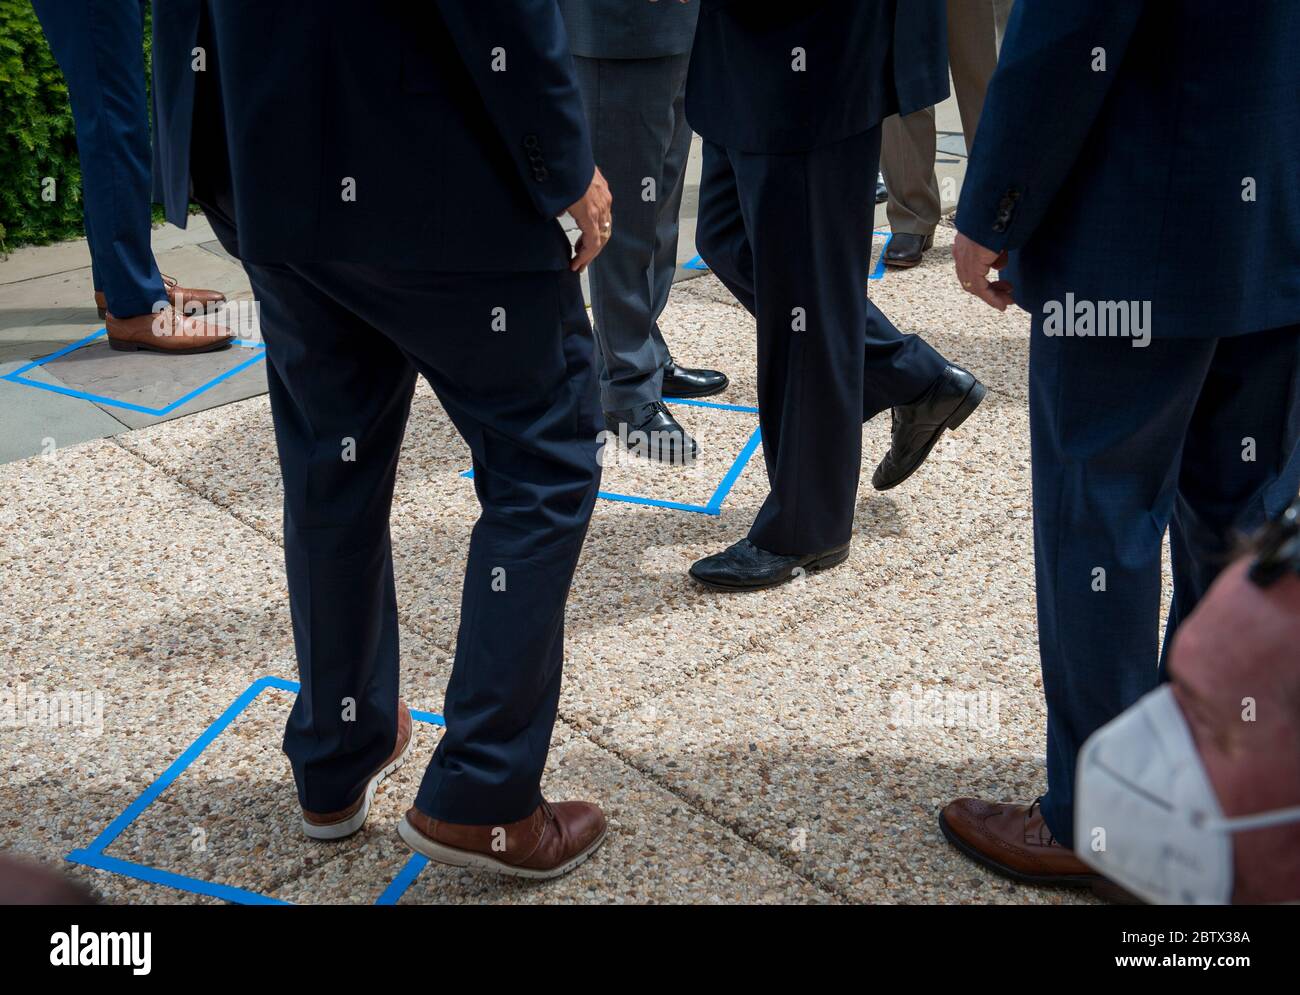 Republican members of Congress arrive and stand outside of the safe distancing squares identified on the pavement, prior to House Minority Leader Rep. Kevin McCarthy's (R-Calif.) press conference with House Minority Whip Rep. Steve Scalise (R-LA), House GOP Conference Chairwoman Liz Cheney (R-WY) and others, to announce that Republican leaders have filed a lawsuit against House Speaker Nancy Pelosi and congressional officials in an effort to block the House of Representatives from using a proxy voting system to allow for remote voting during the coronavirus pandemic, outside of the U.S. Capito Stock Photo